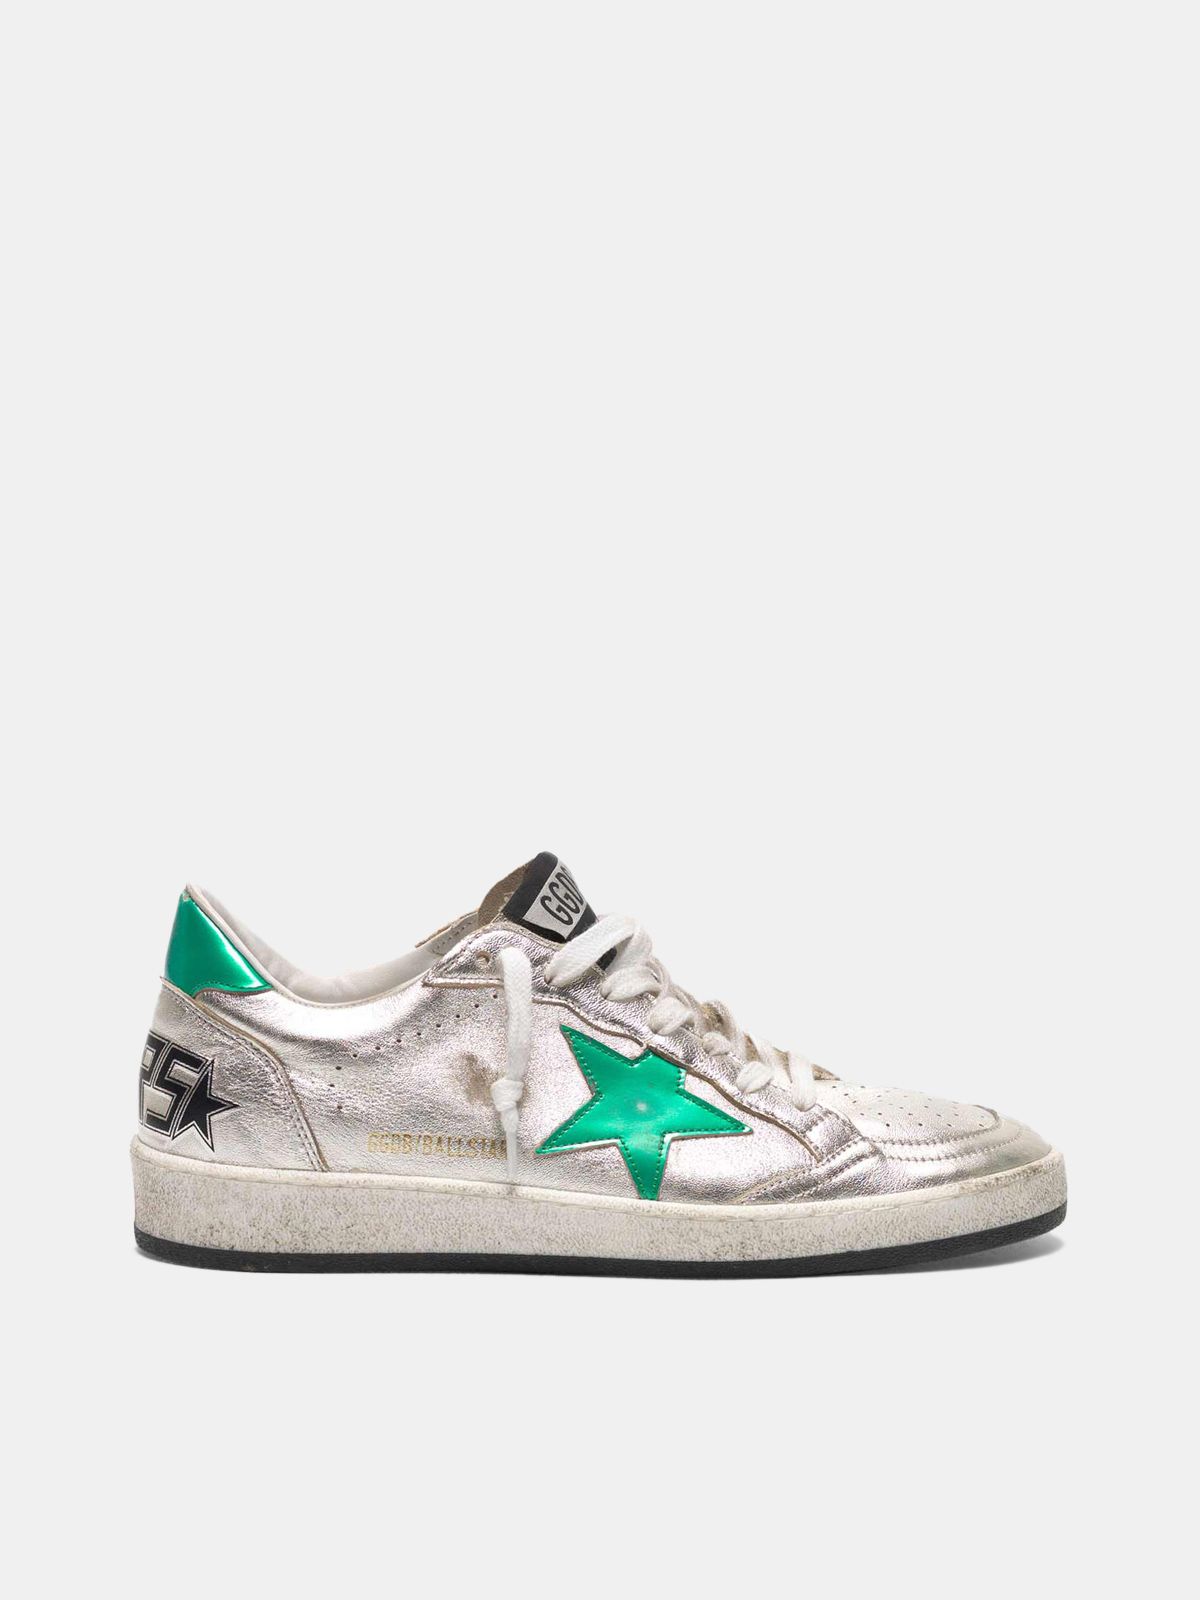 Silver Ball Star sneakers with green 